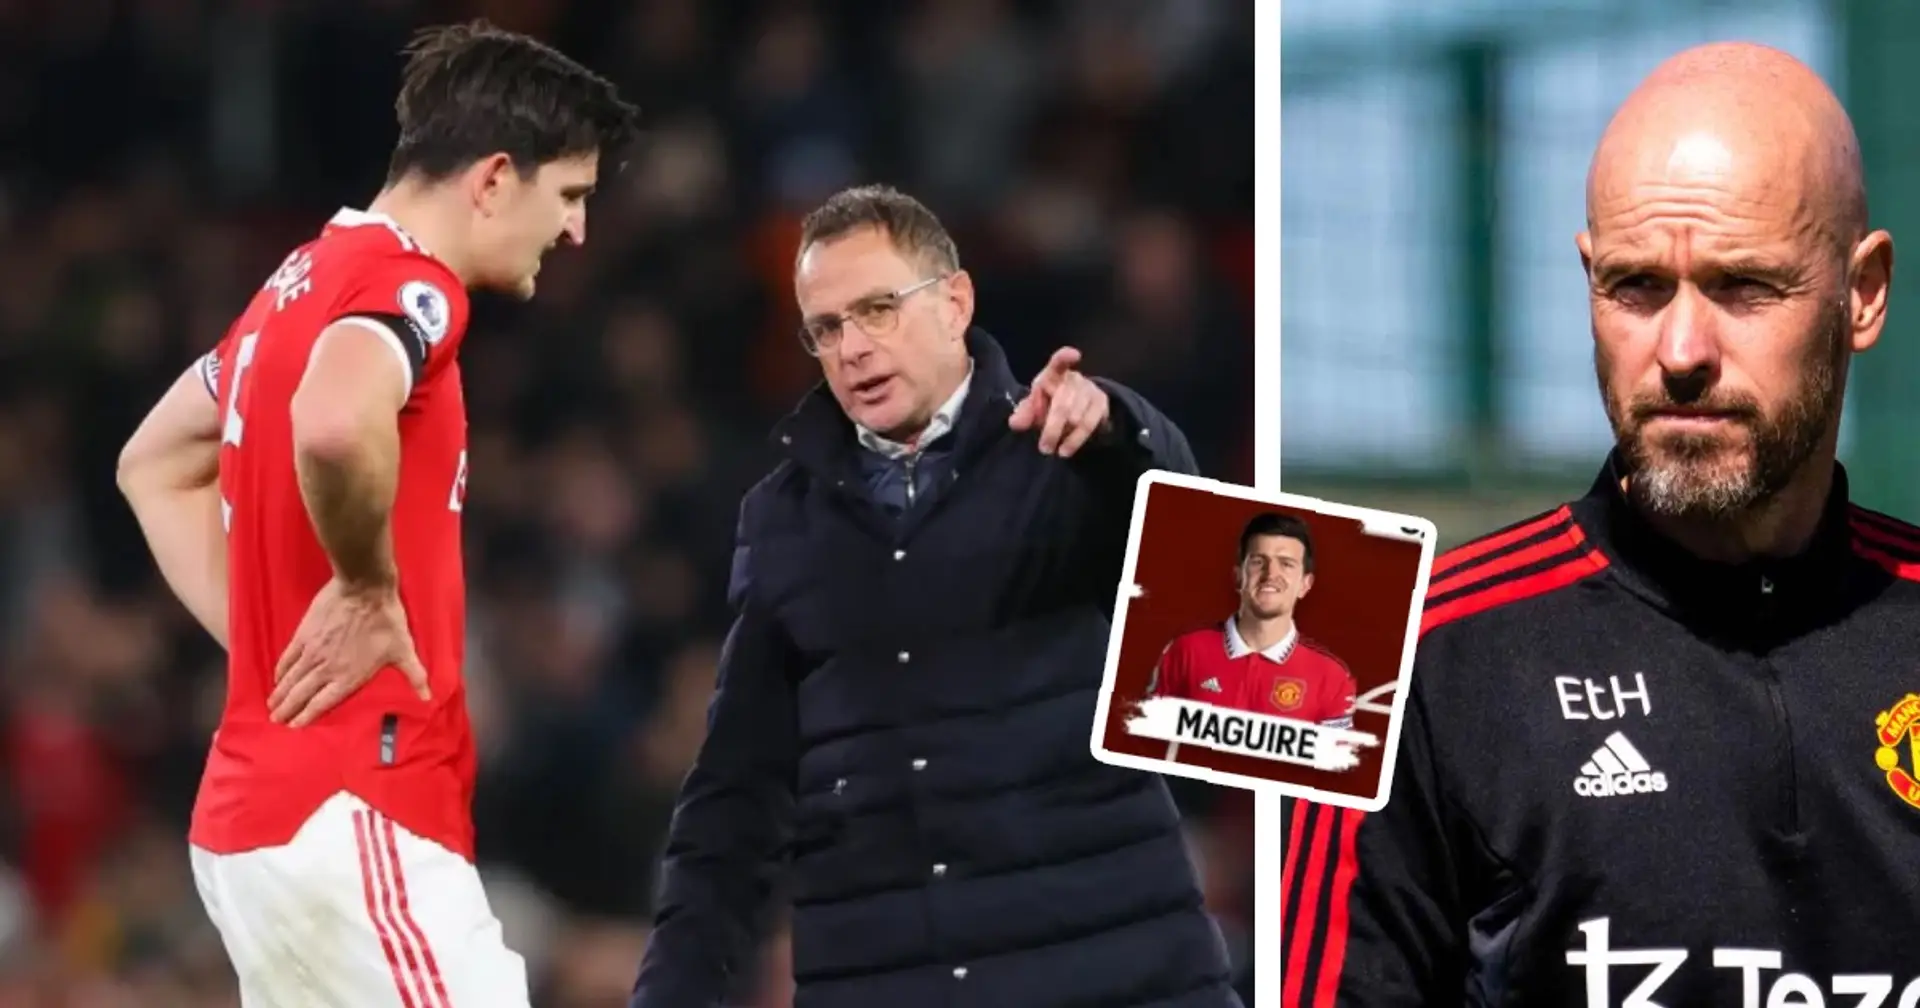 'He's more capable there': Ten Hag reveals Maguire's best position - Rangnick tested him in that role